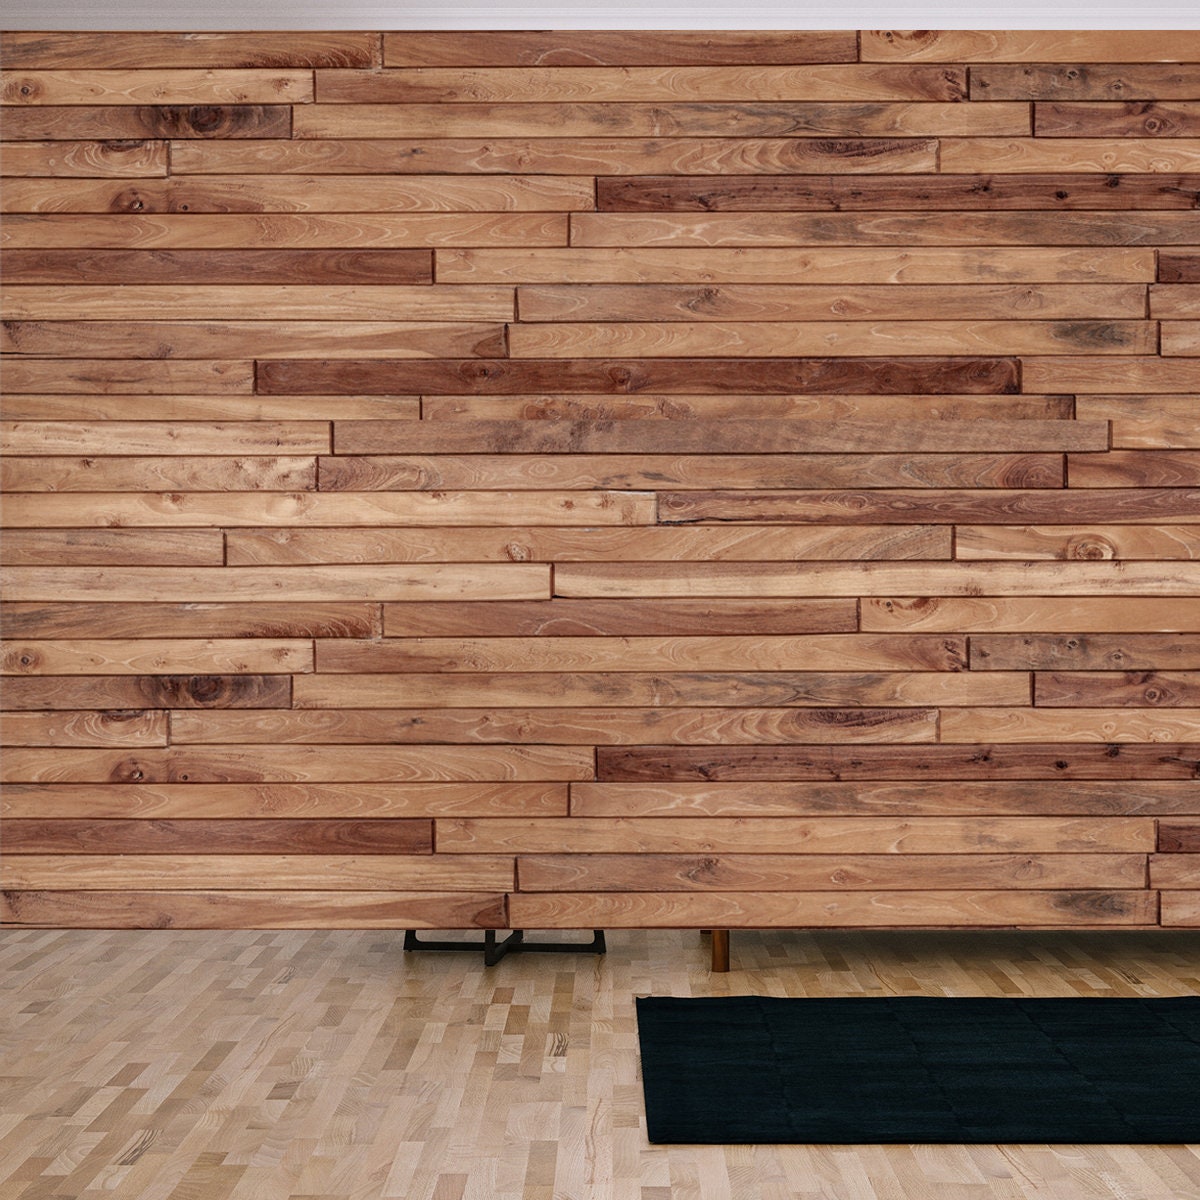 Panorama Wood Wall Texture, Wooden Background, Beautiful Abstract Wallpaper Living Room Mural